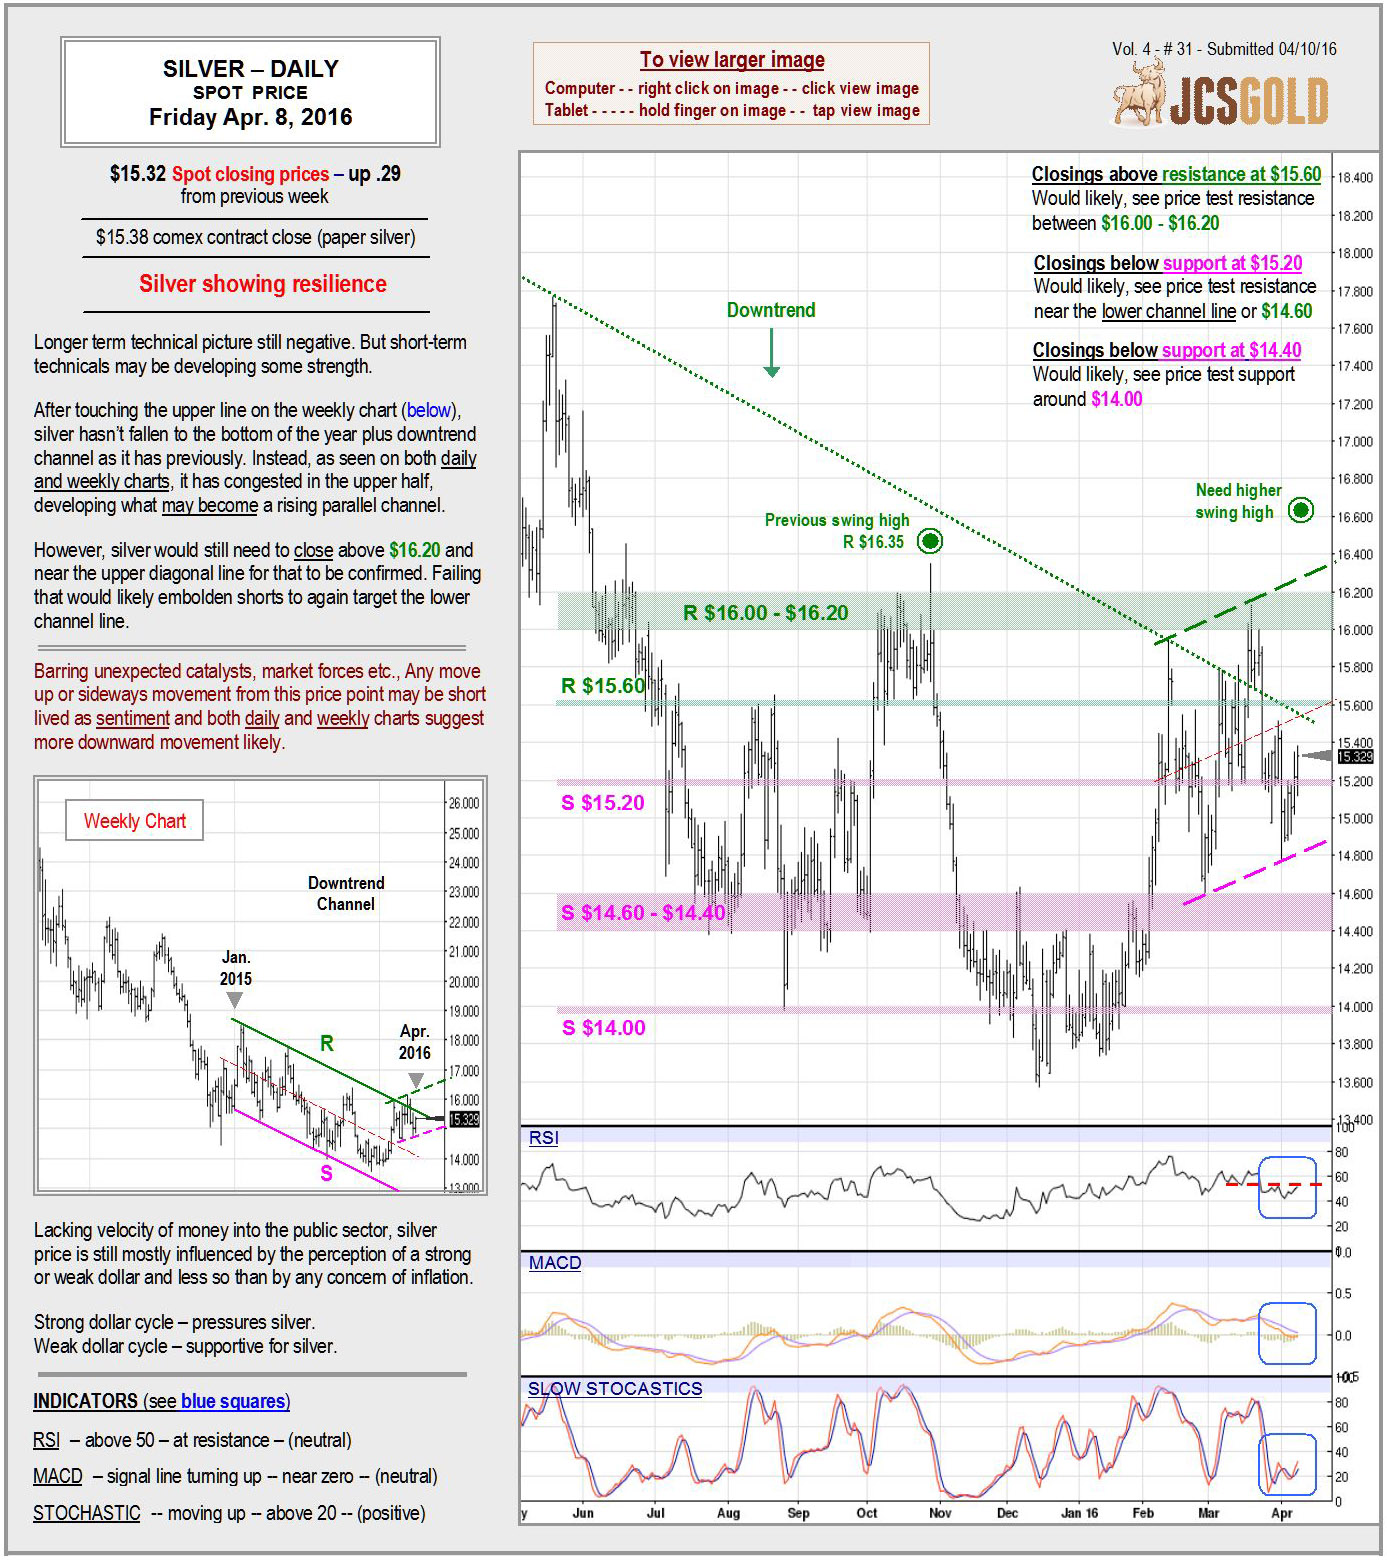 April 8, 2016 chart & commentary